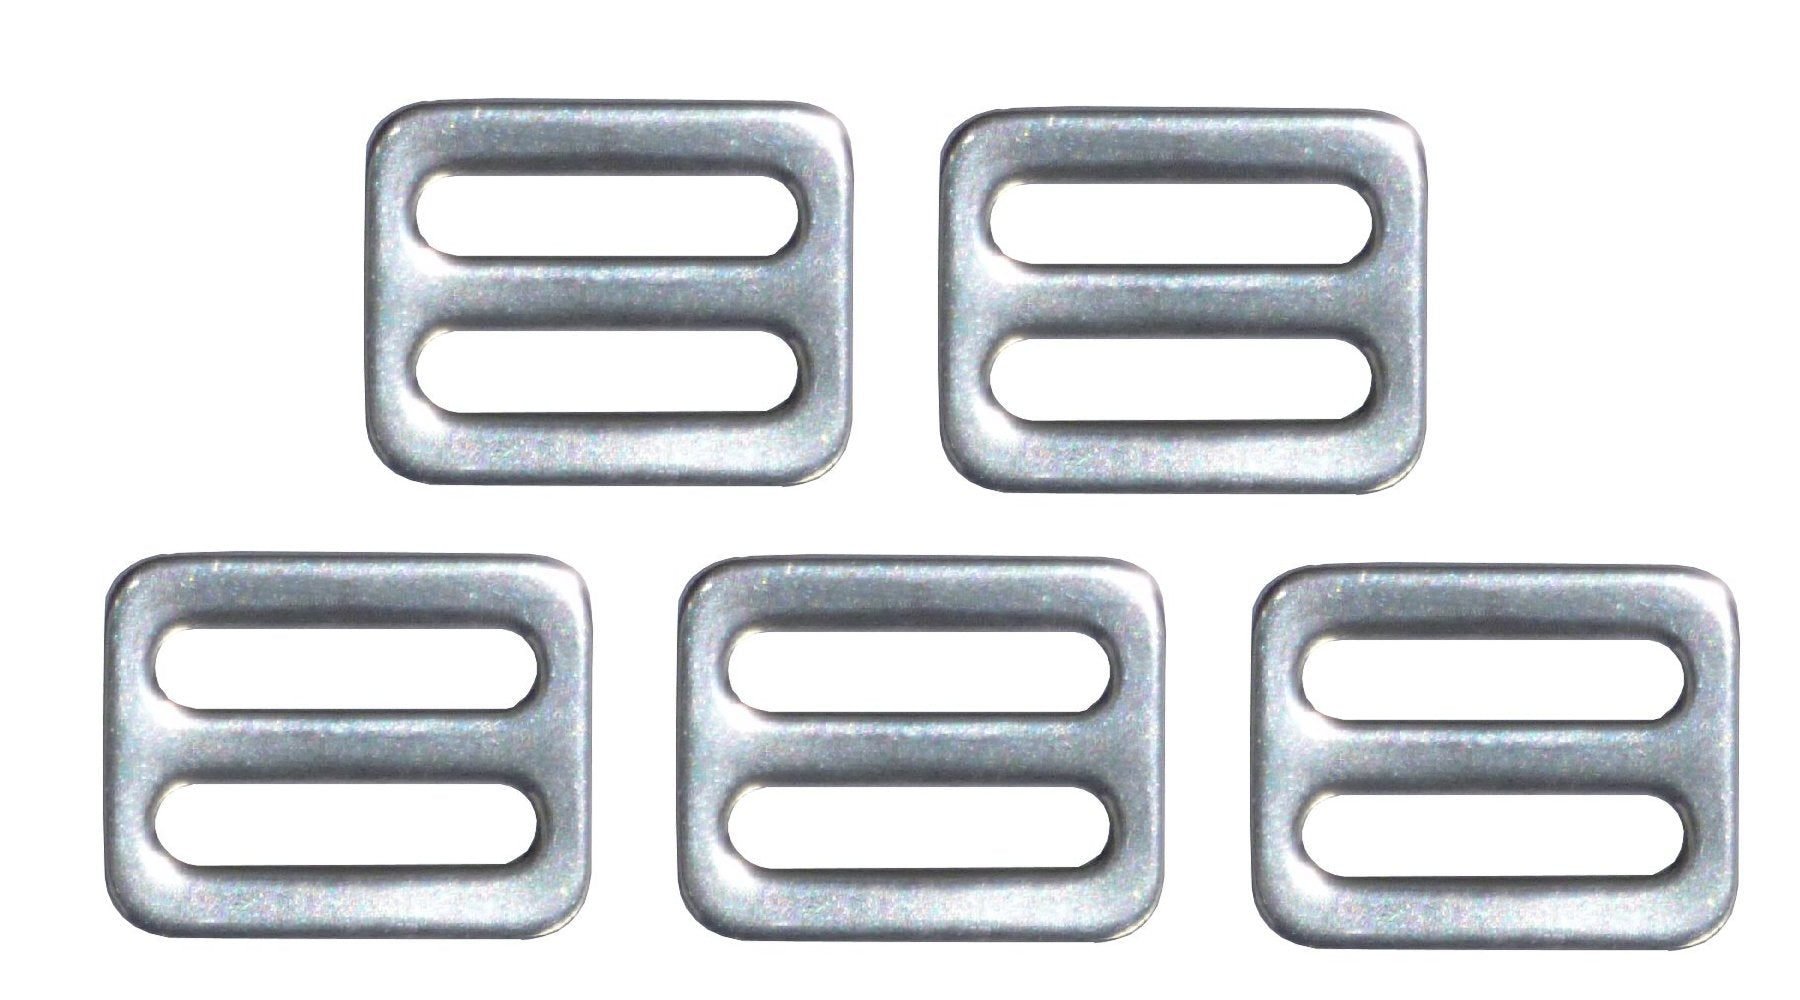 Benristraps 25mm stainless steel triglide (pack of 5)